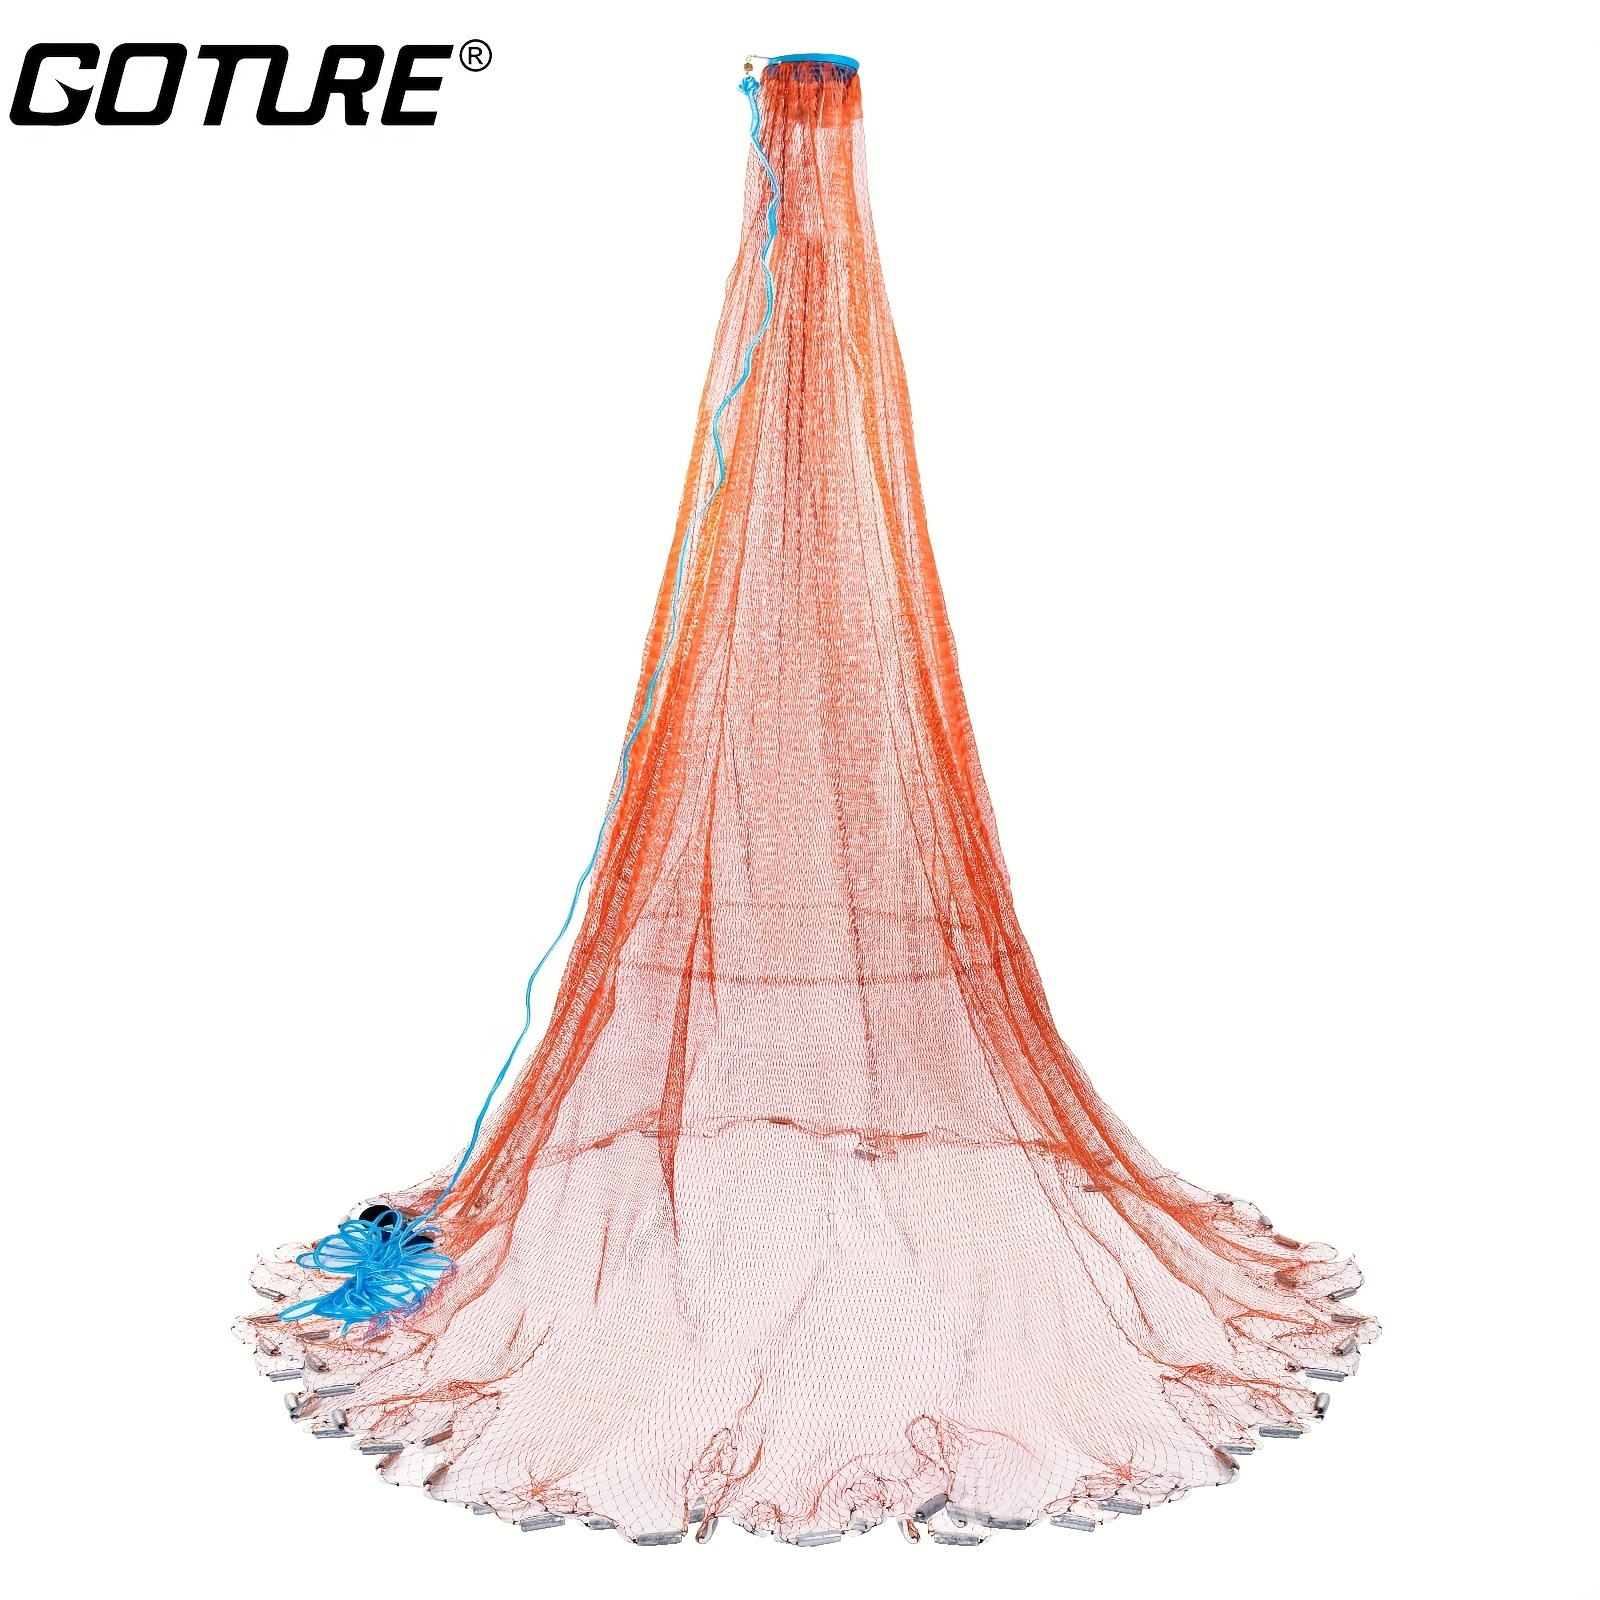 Buy Goture American Saltwater Fishing Cast Net for Bait Trap Fish